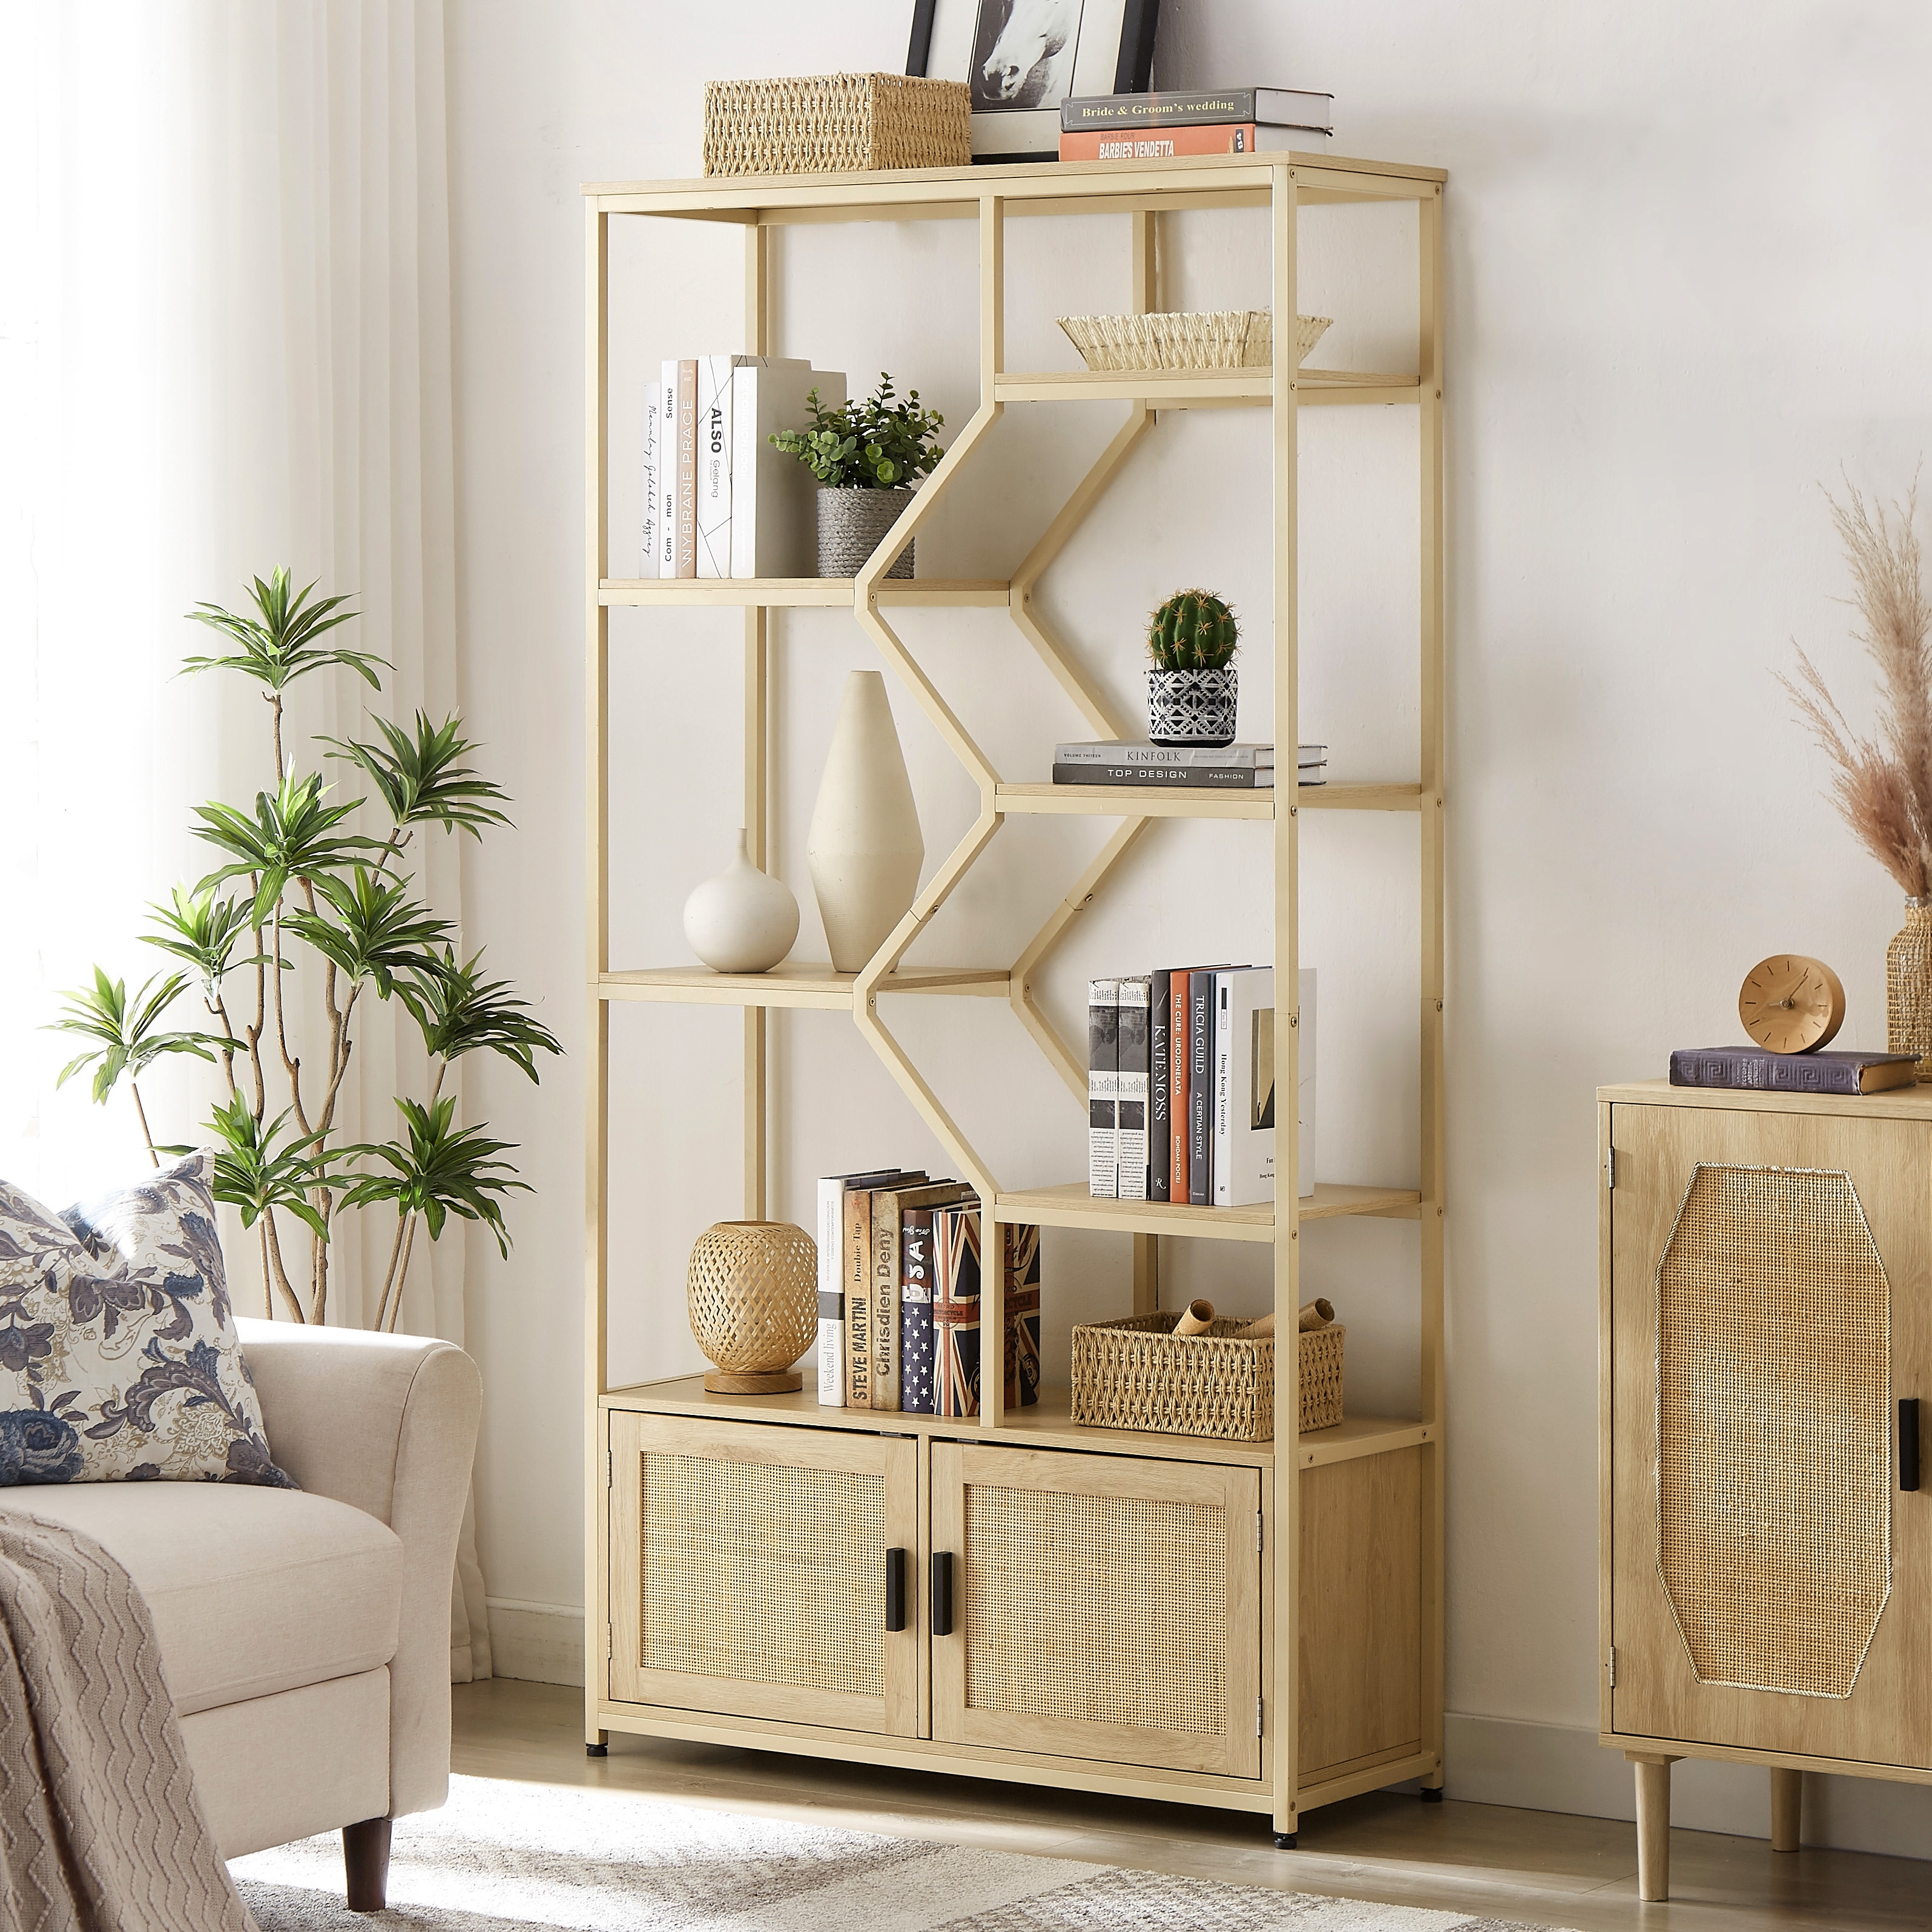 Natural Style Rattan Bookshelf, Plant Stand, 7-Tier Bookcase Storage Rack  with Cabinet, Display Shelf for Living Room, Office Bed Bath  Beyond  37840628